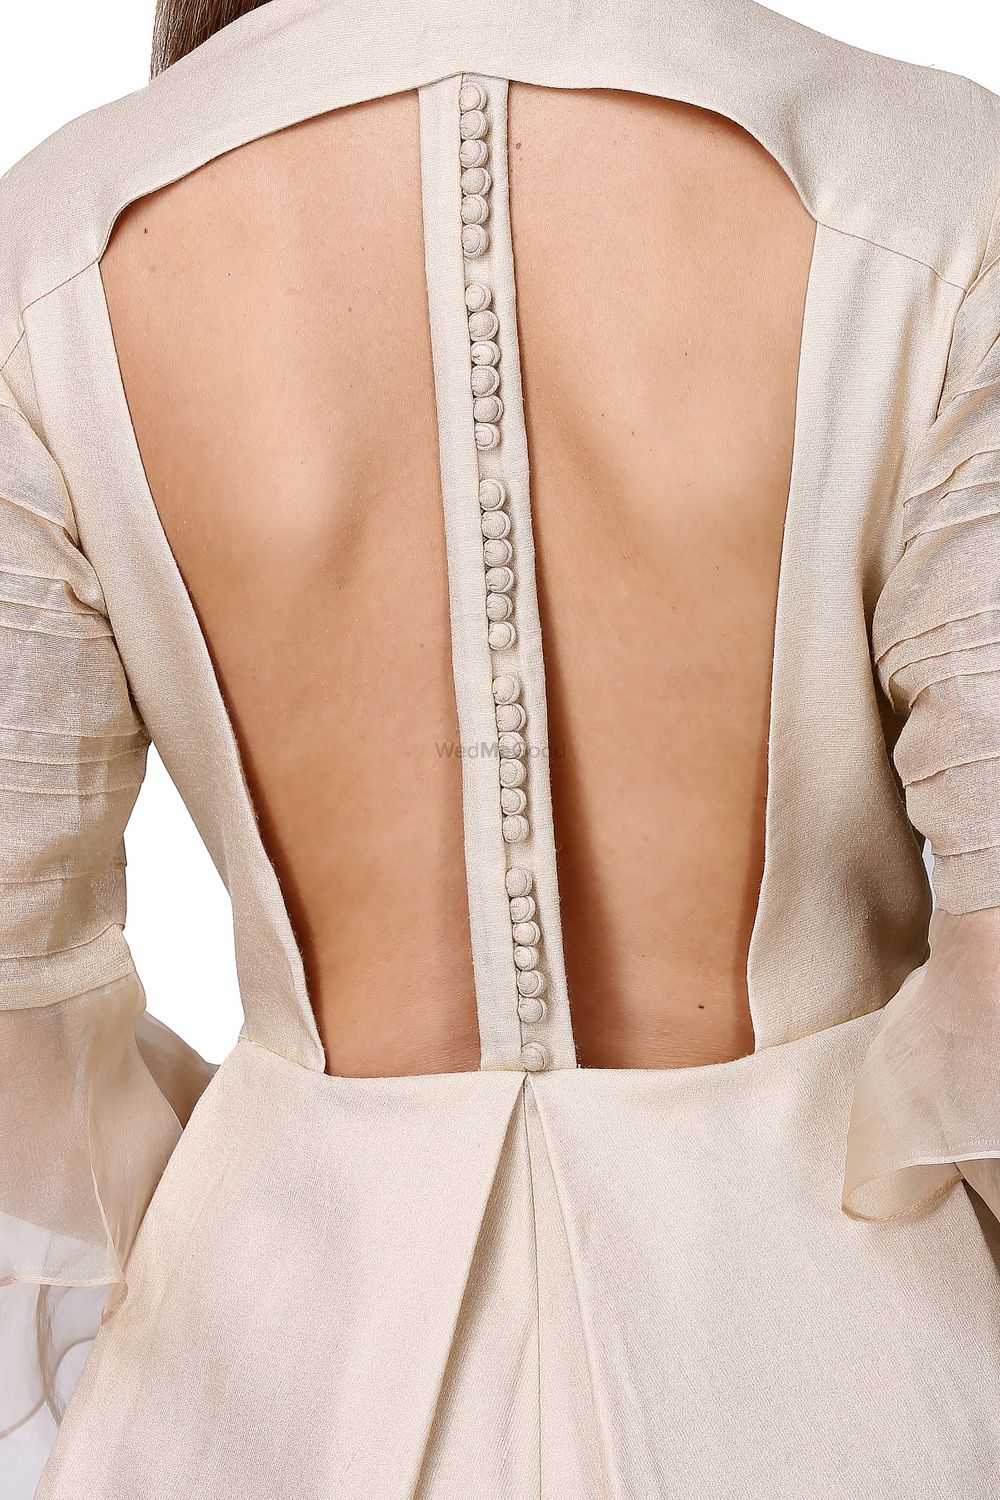 Photo of Unique back design style for summer wedding